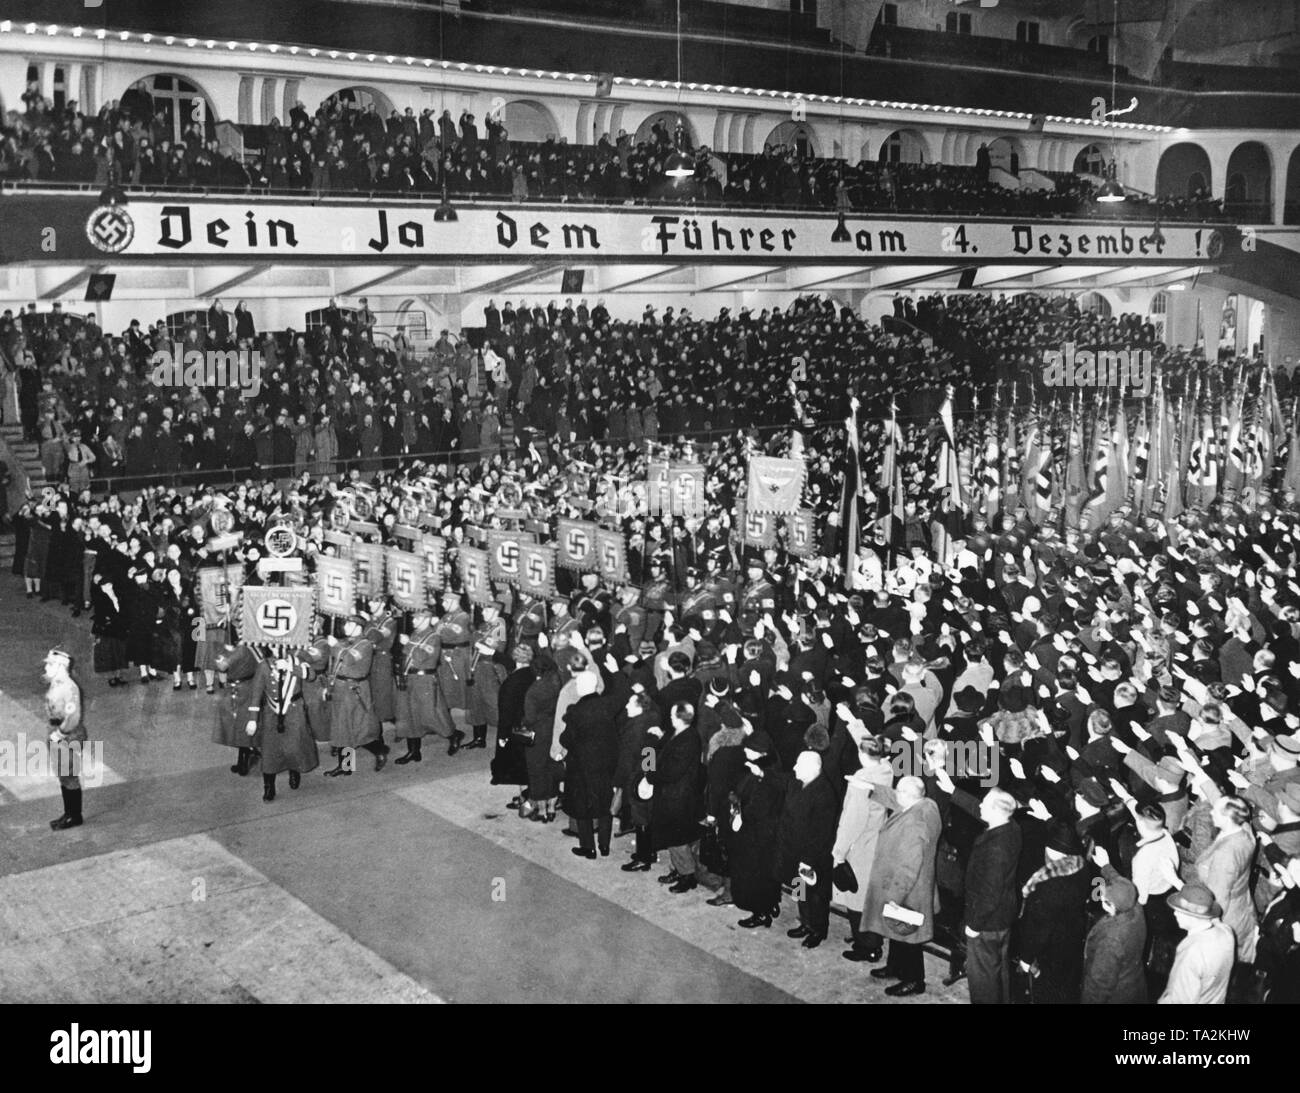 Procession of standards and flags in the Berlin Sportpalast. Election rally in Berlin on the occasion of the Sudeten German by-elections. In the plebiscite, votes are cast concerning the annexation of the Sudetenland to the German Reich. On the poster: 'Your Yes for the Fuehrer on December 4'. Stock Photo